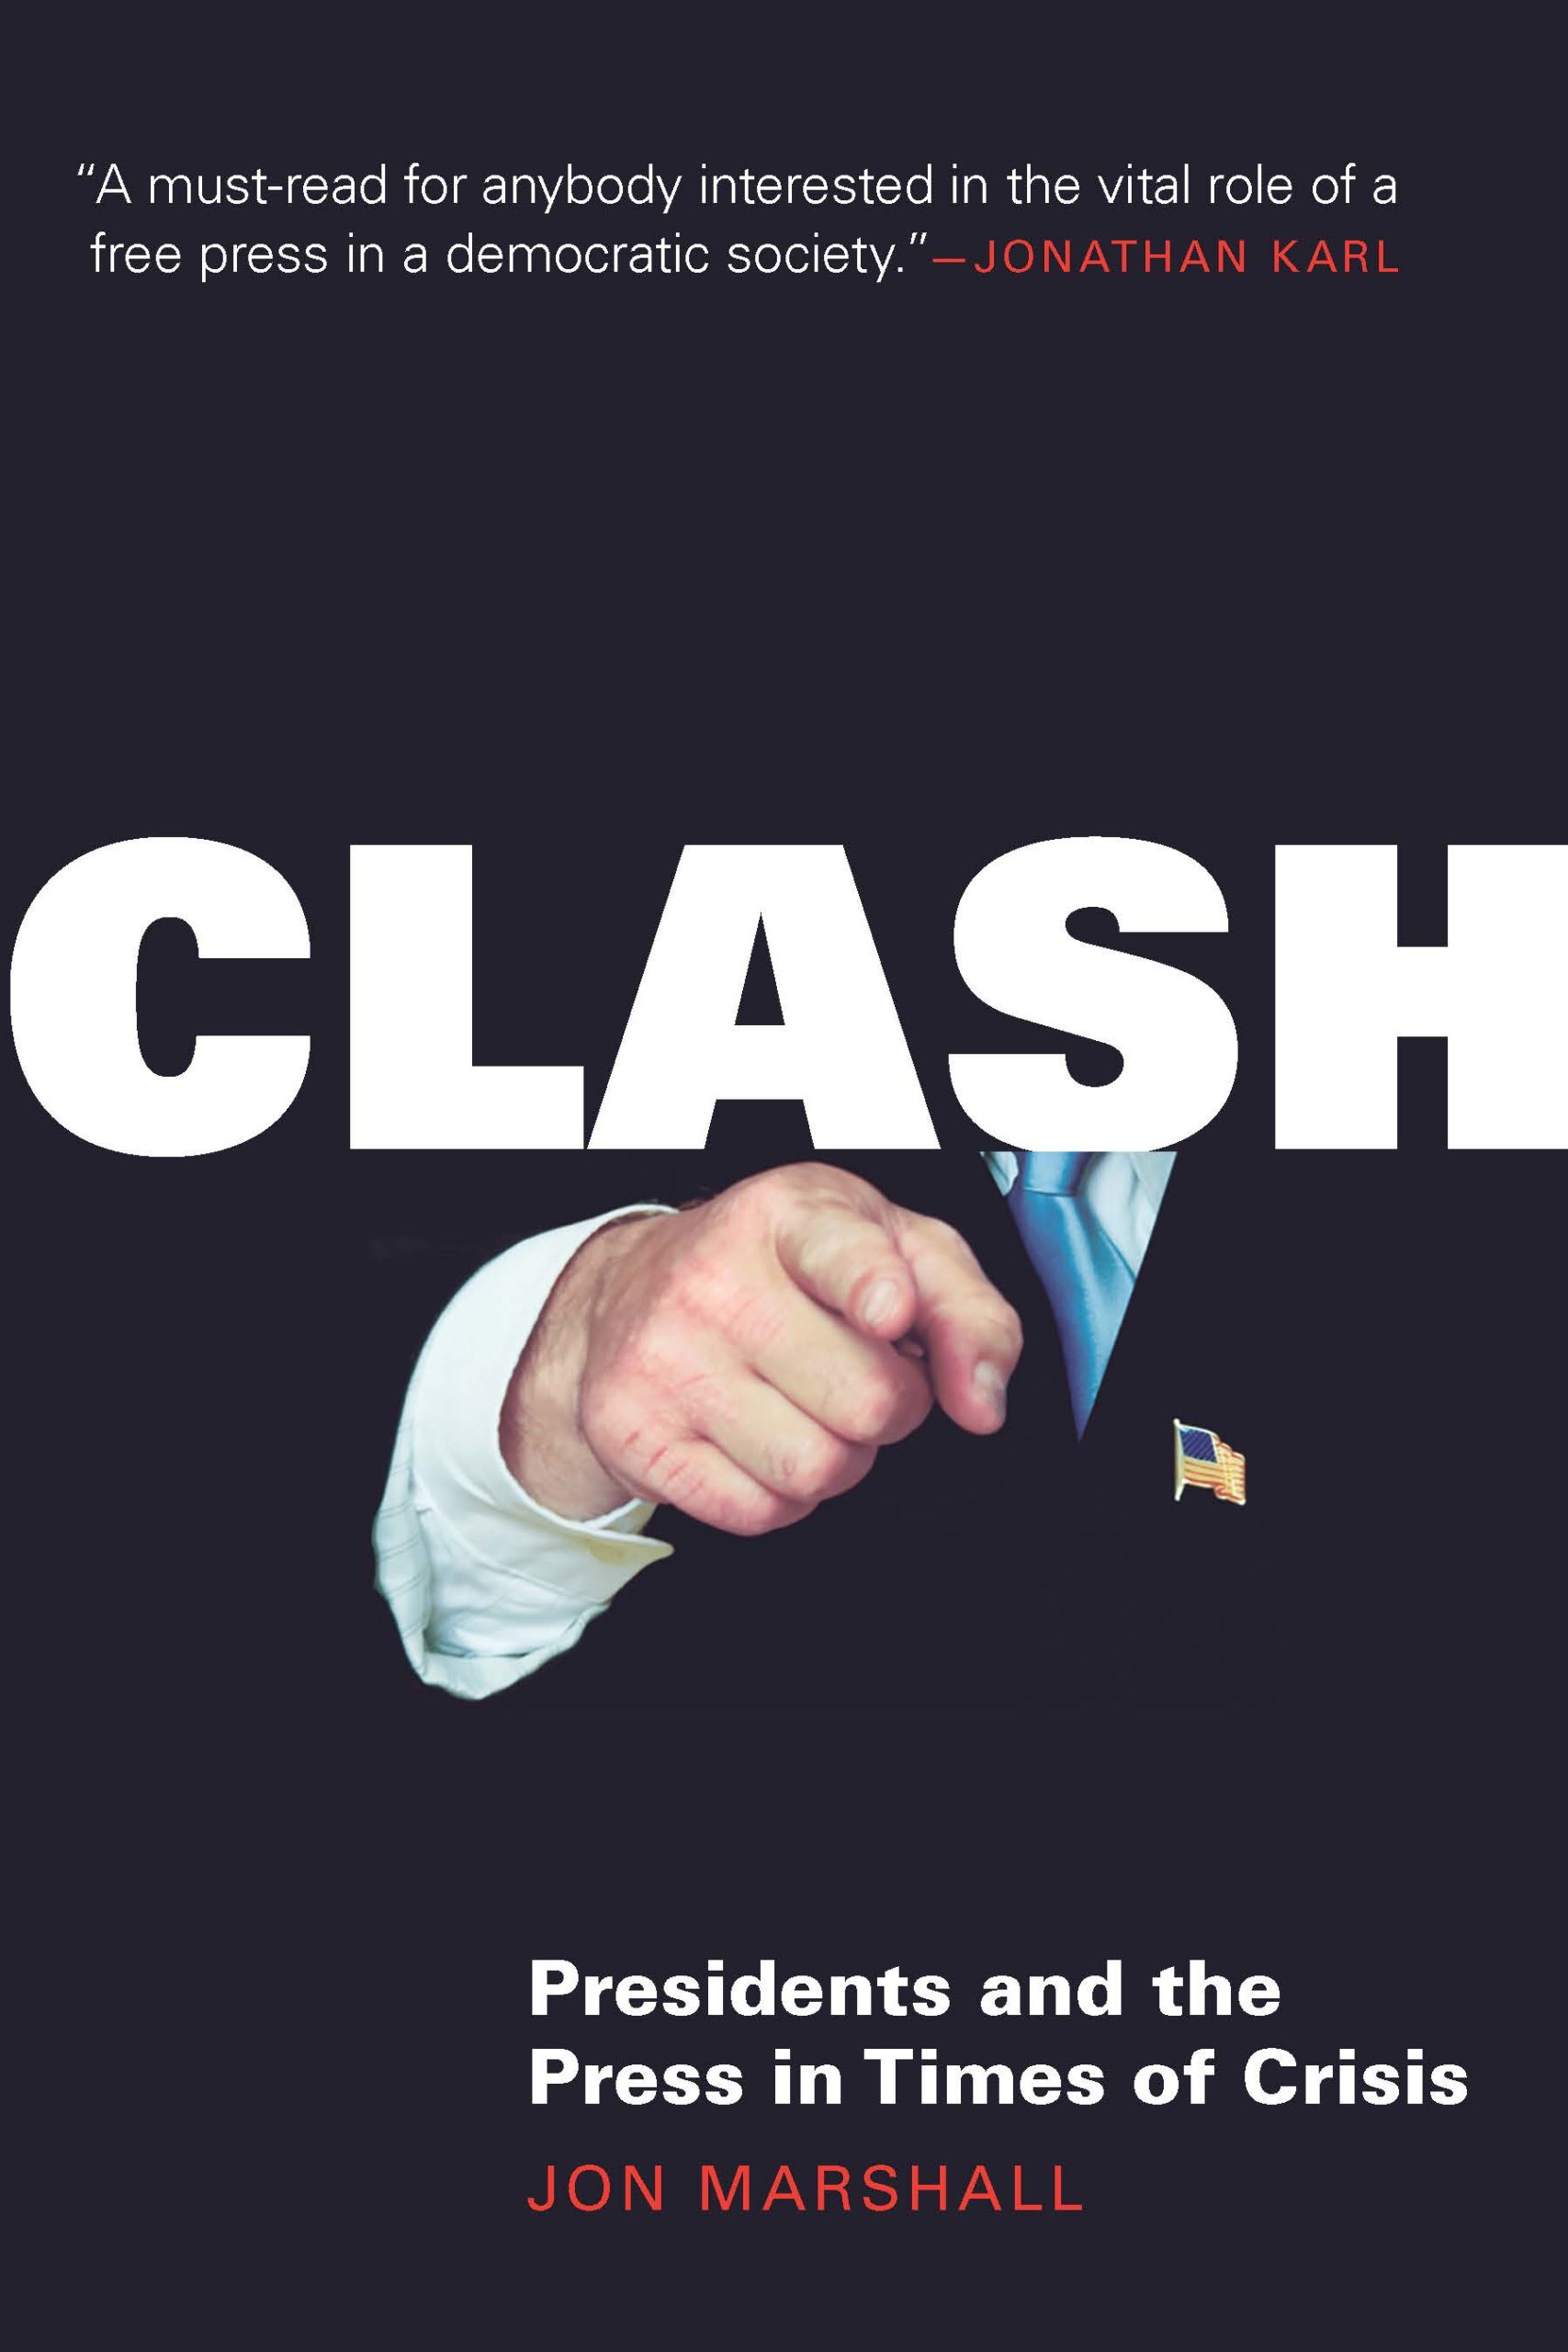 The book cover for "Clash: Presidents and the Press." A man wears a suit with an American flag pin and points toward the camera. Over it, reads "CLASH: Presidents and the Press." At the top of the cover is a quote from Jonathan Karl that reads: "A must-read for anybody interested in the vital role of a free press in a democratic society."